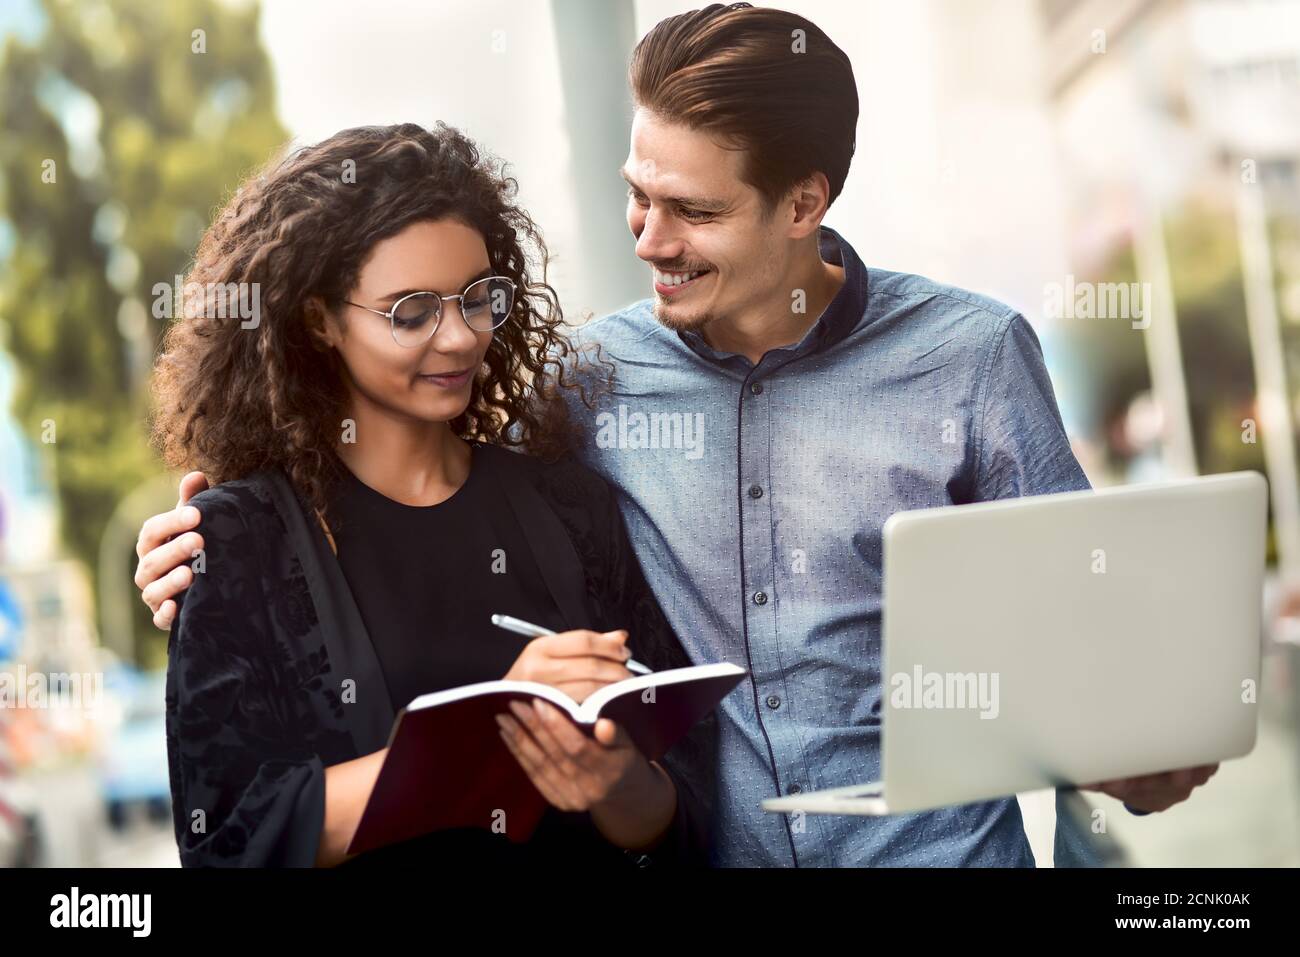 Business meeting. Man and woman discussing work and looking at the laptop screen. Working together in the open air. Stock Photo